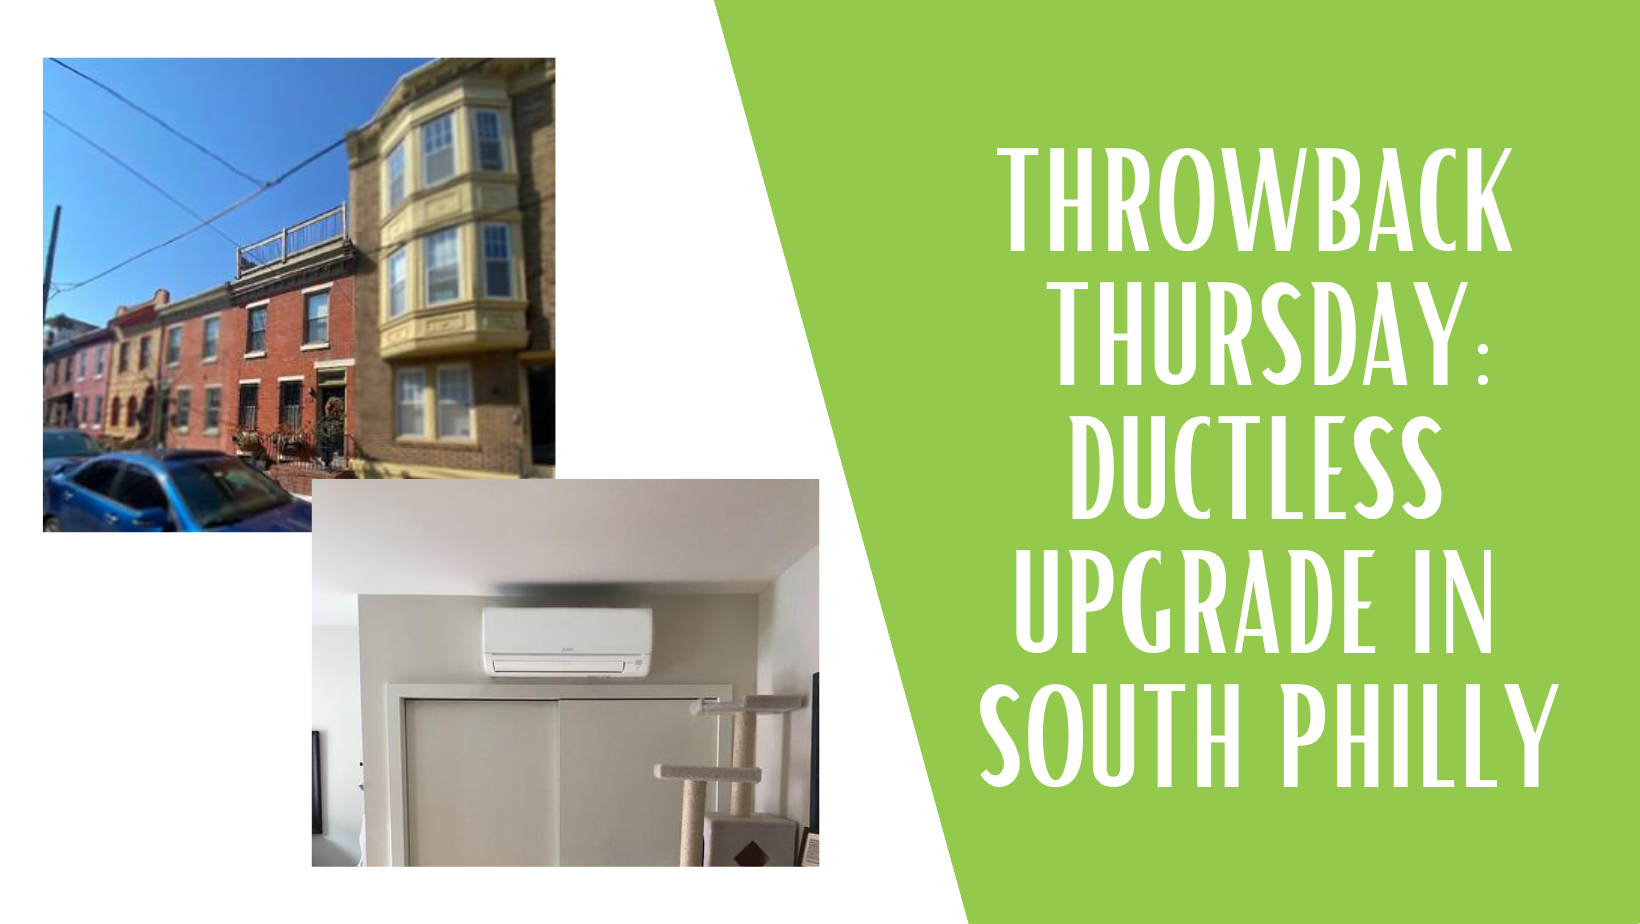 Throwback Thursday: Mitsubishi Ductless System Gives South Philadelphia Rowhome a Cool Upgrade!